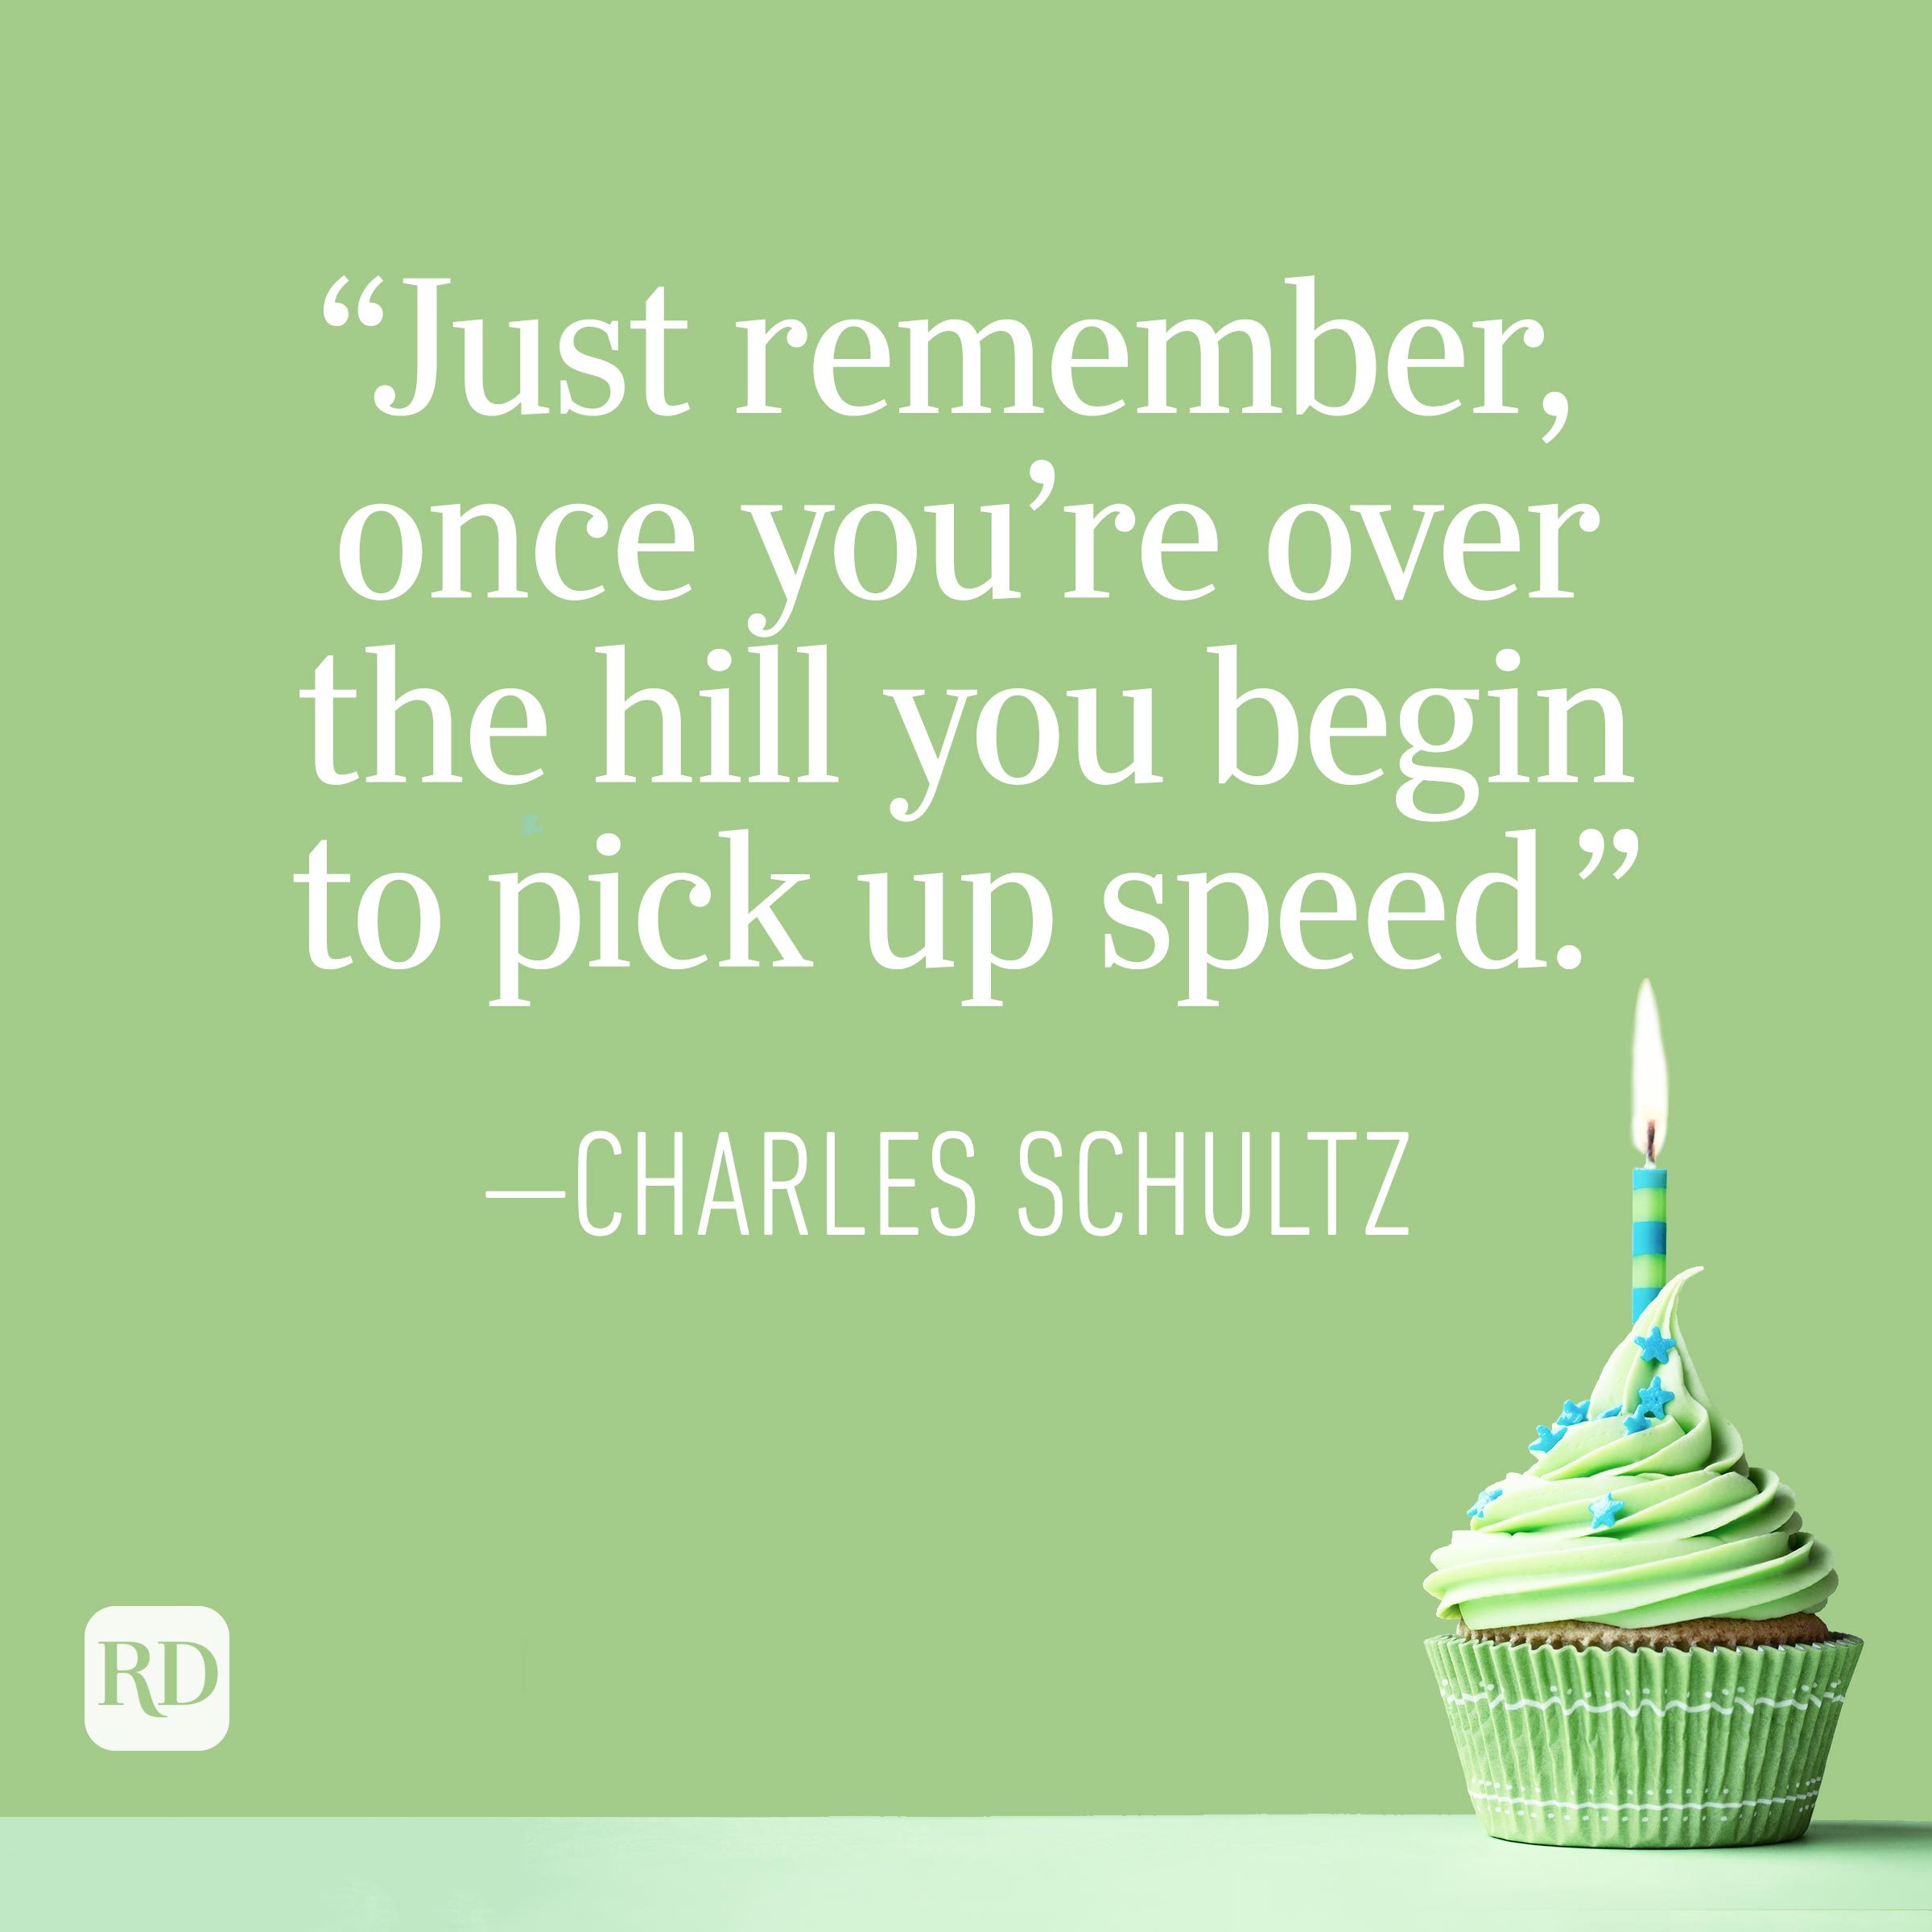 "Just remember, once you're over the hill you begin to pick up speed." —Charles Schultz